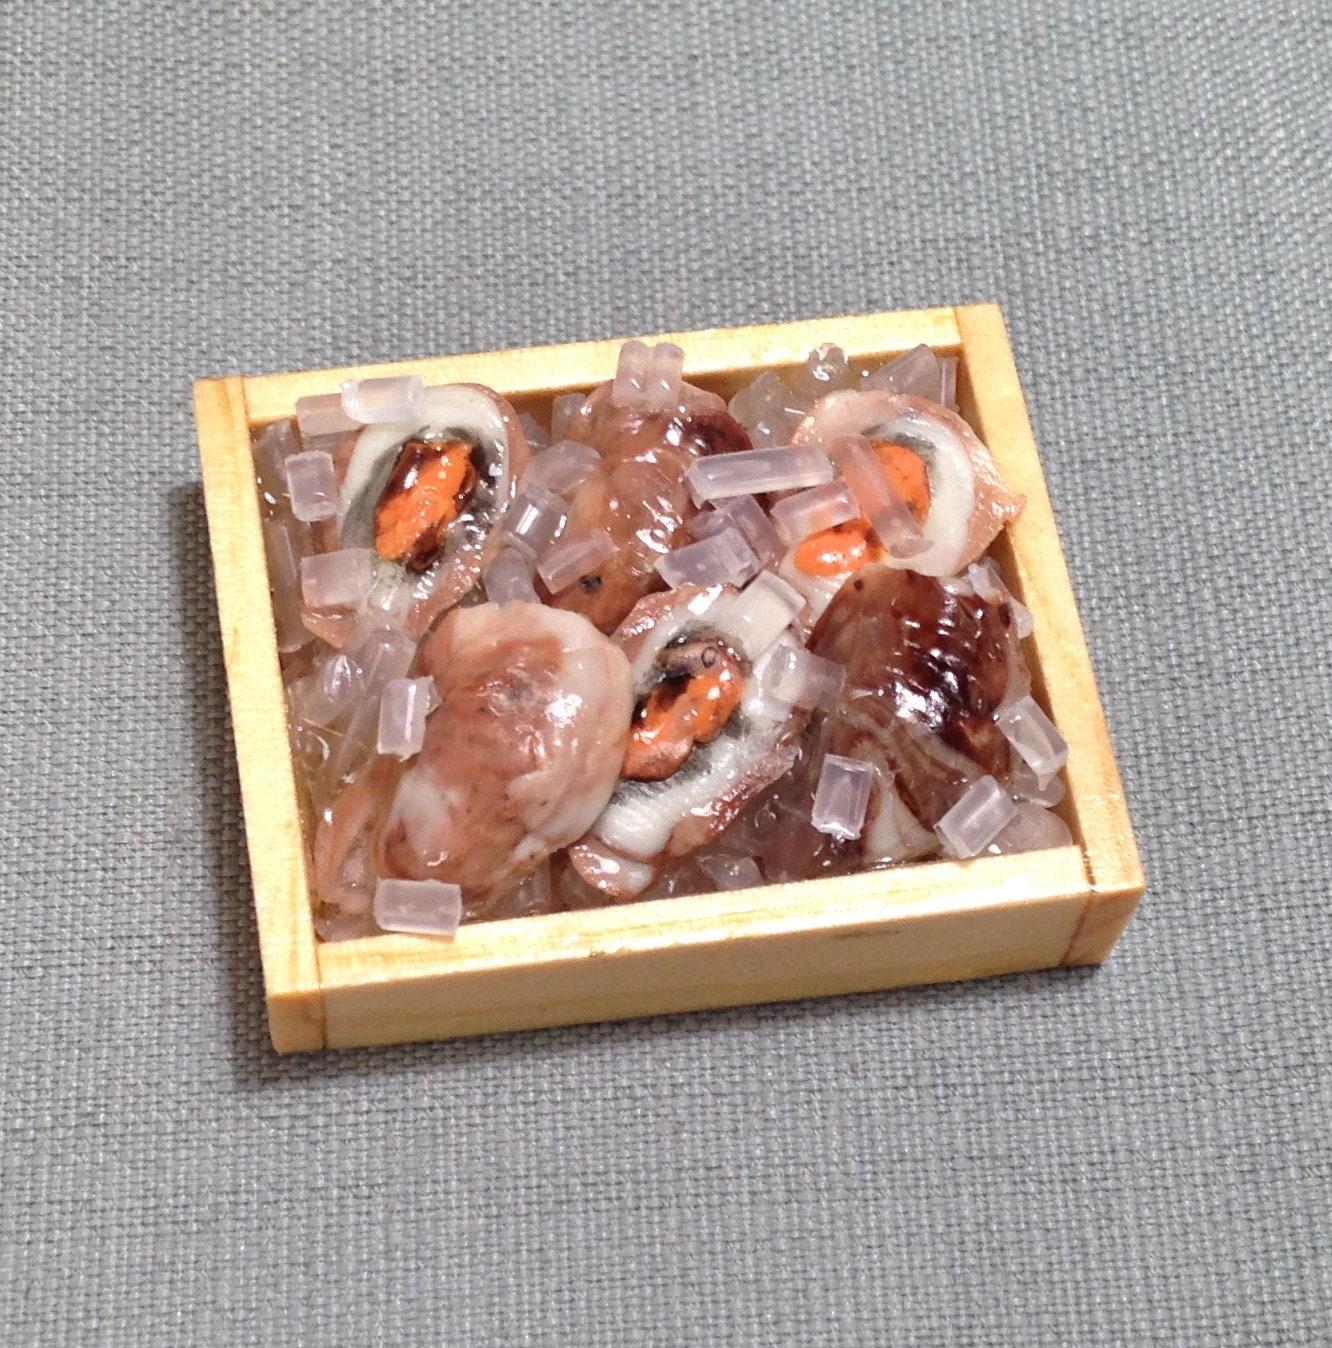 Miniature Dollhouse Scallops Tray Clay Polymer Food Supply Scallop Seafood Fish Cute Small Ice Cube Dish Wood Display Jewelry Supplies 1/12